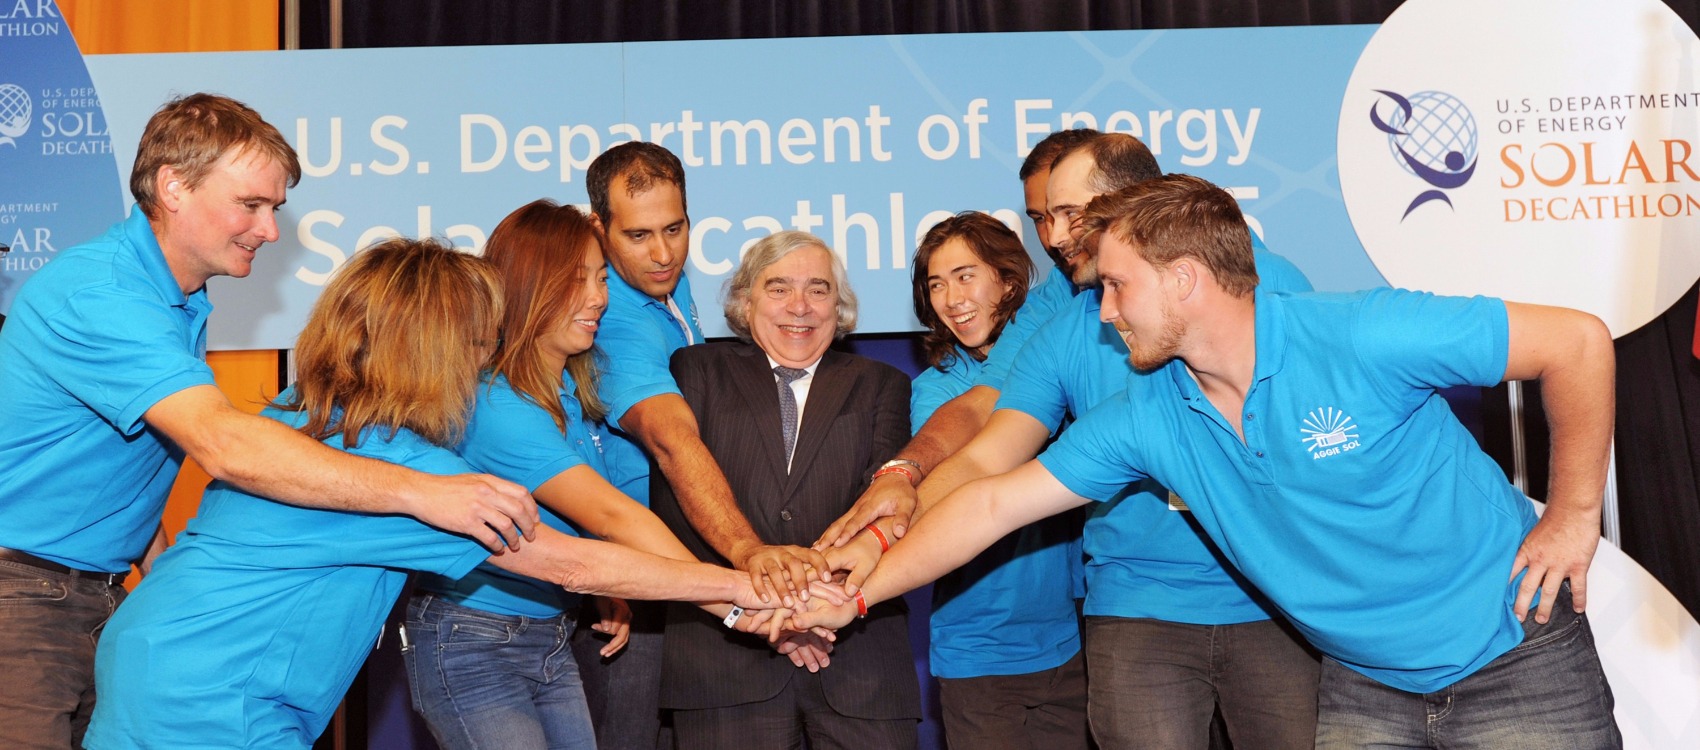 Photo of a man with shoulder-length white hair, Secretary of Energy, Dr. Ernest Moniz, wearing a suit and tie surrounded by seven men and women in blue shirts, all student team members of the Solar Decathlon 2015 team from the University of California, Davis. Each person has one hand on top of the others’ hands in preparation for a cheer of team spirit.